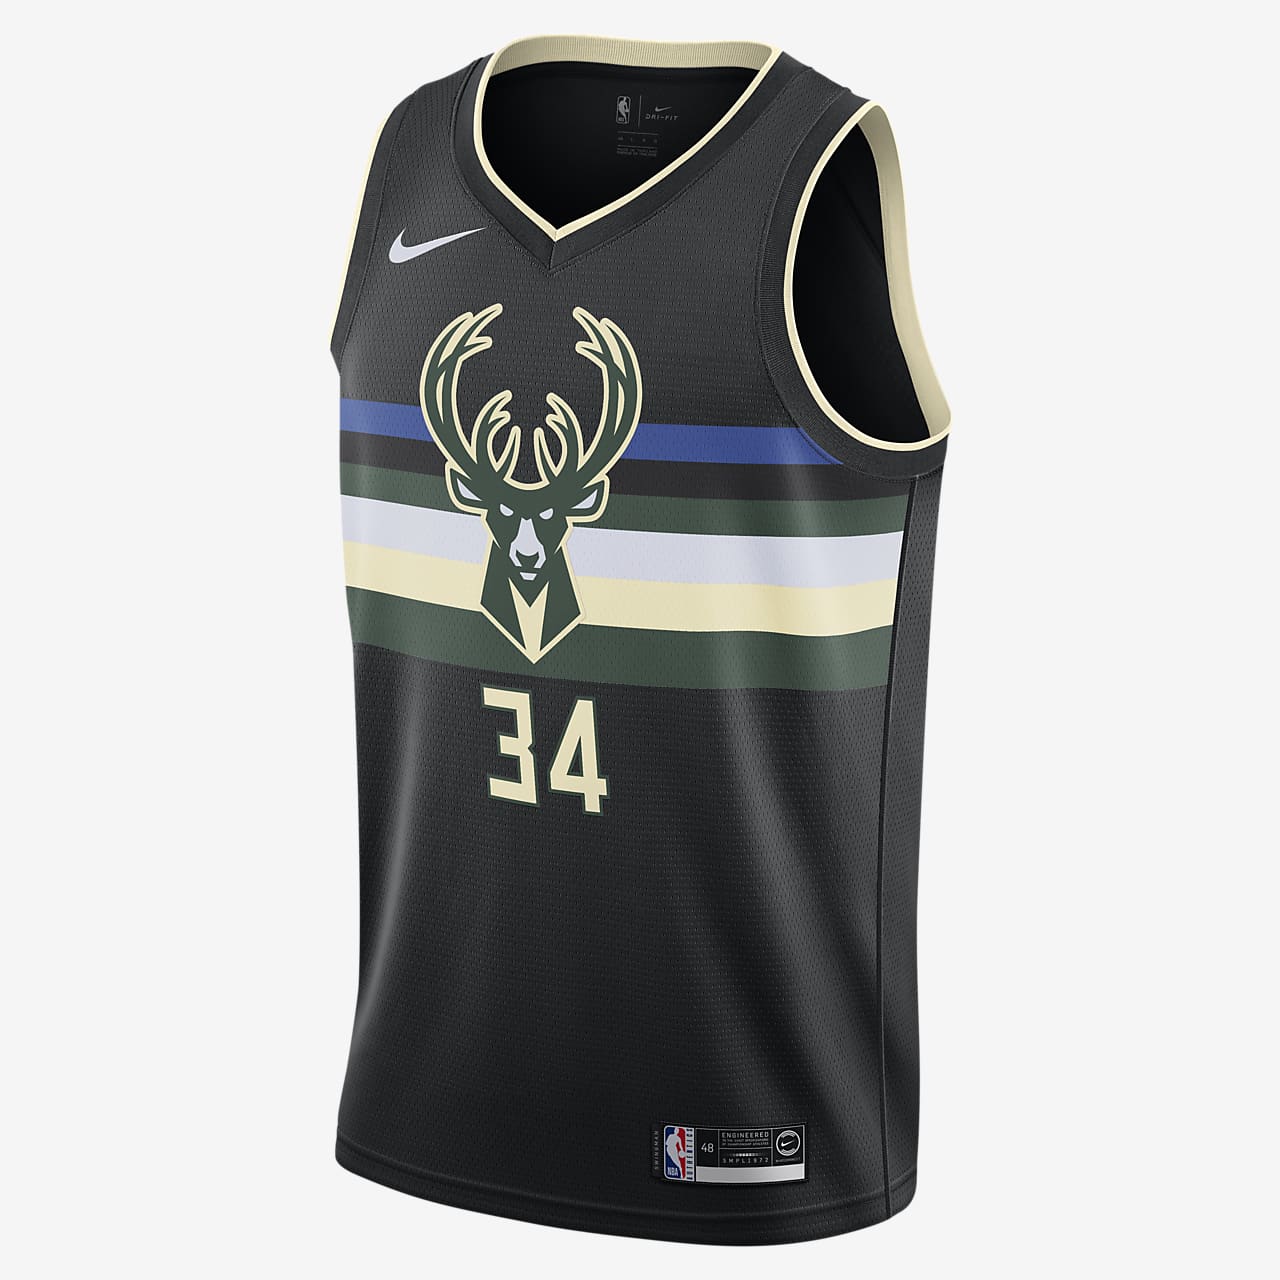 giannis antetokounmpo jersey shirt,OFF 75%,www.concordehotels.com.tr